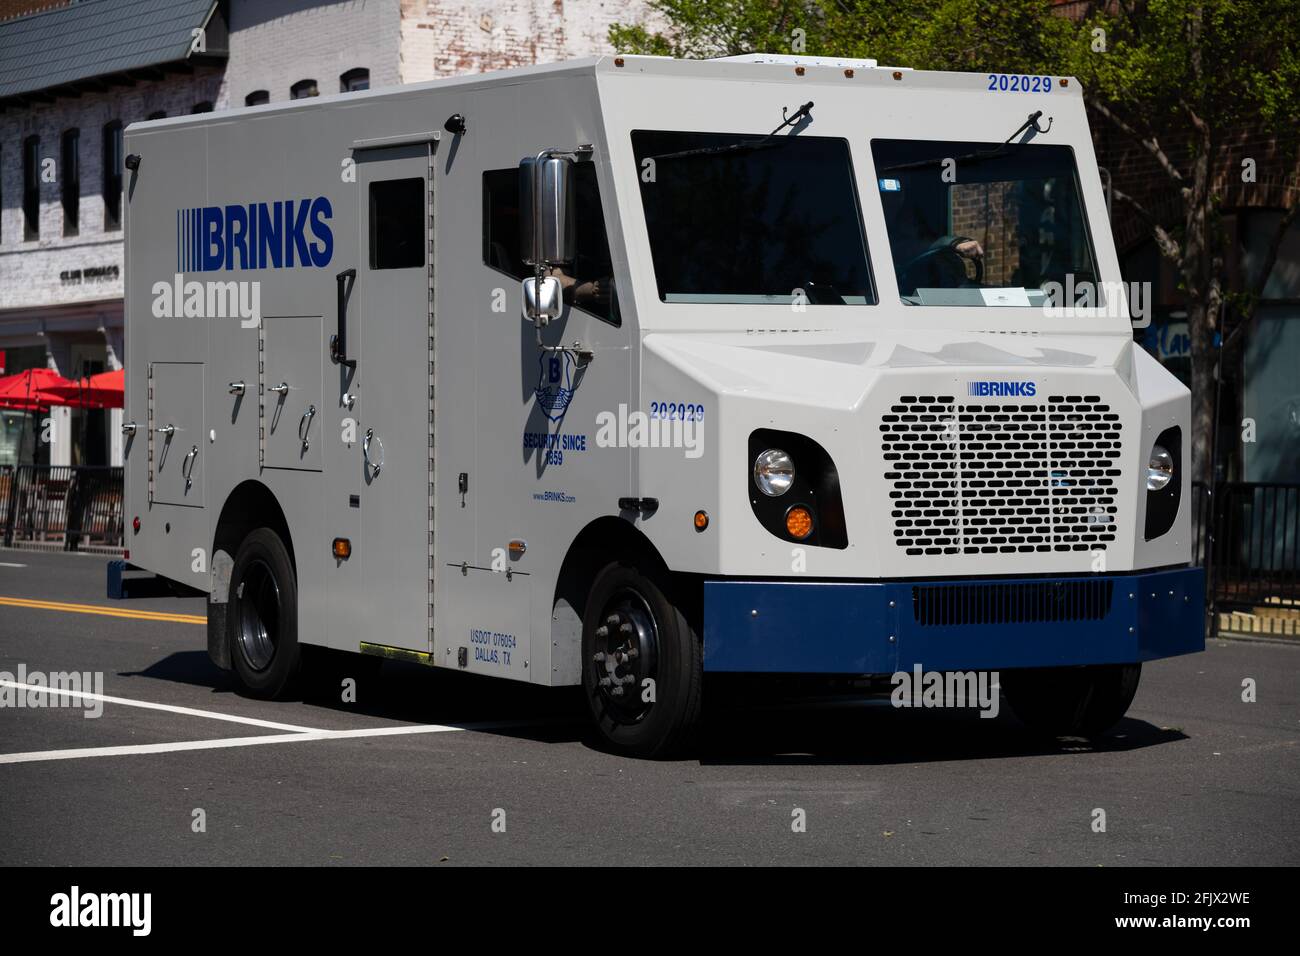 https://c8.alamy.com/comp/2FJX2WE/washington-usa-26th-apr-2021-a-general-view-of-a-brinks-armored-truck-in-washington-dc-on-monday-april-26-2021-amid-the-coronavirus-pandemic-this-week-president-biden-will-give-a-joint-address-to-congress-to-mark-his-first-100-days-in-office-and-push-for-further-economic-relief-and-infrastructure-spending-graeme-sloansipa-usa-credit-sipa-usaalamy-live-news-2FJX2WE.jpg